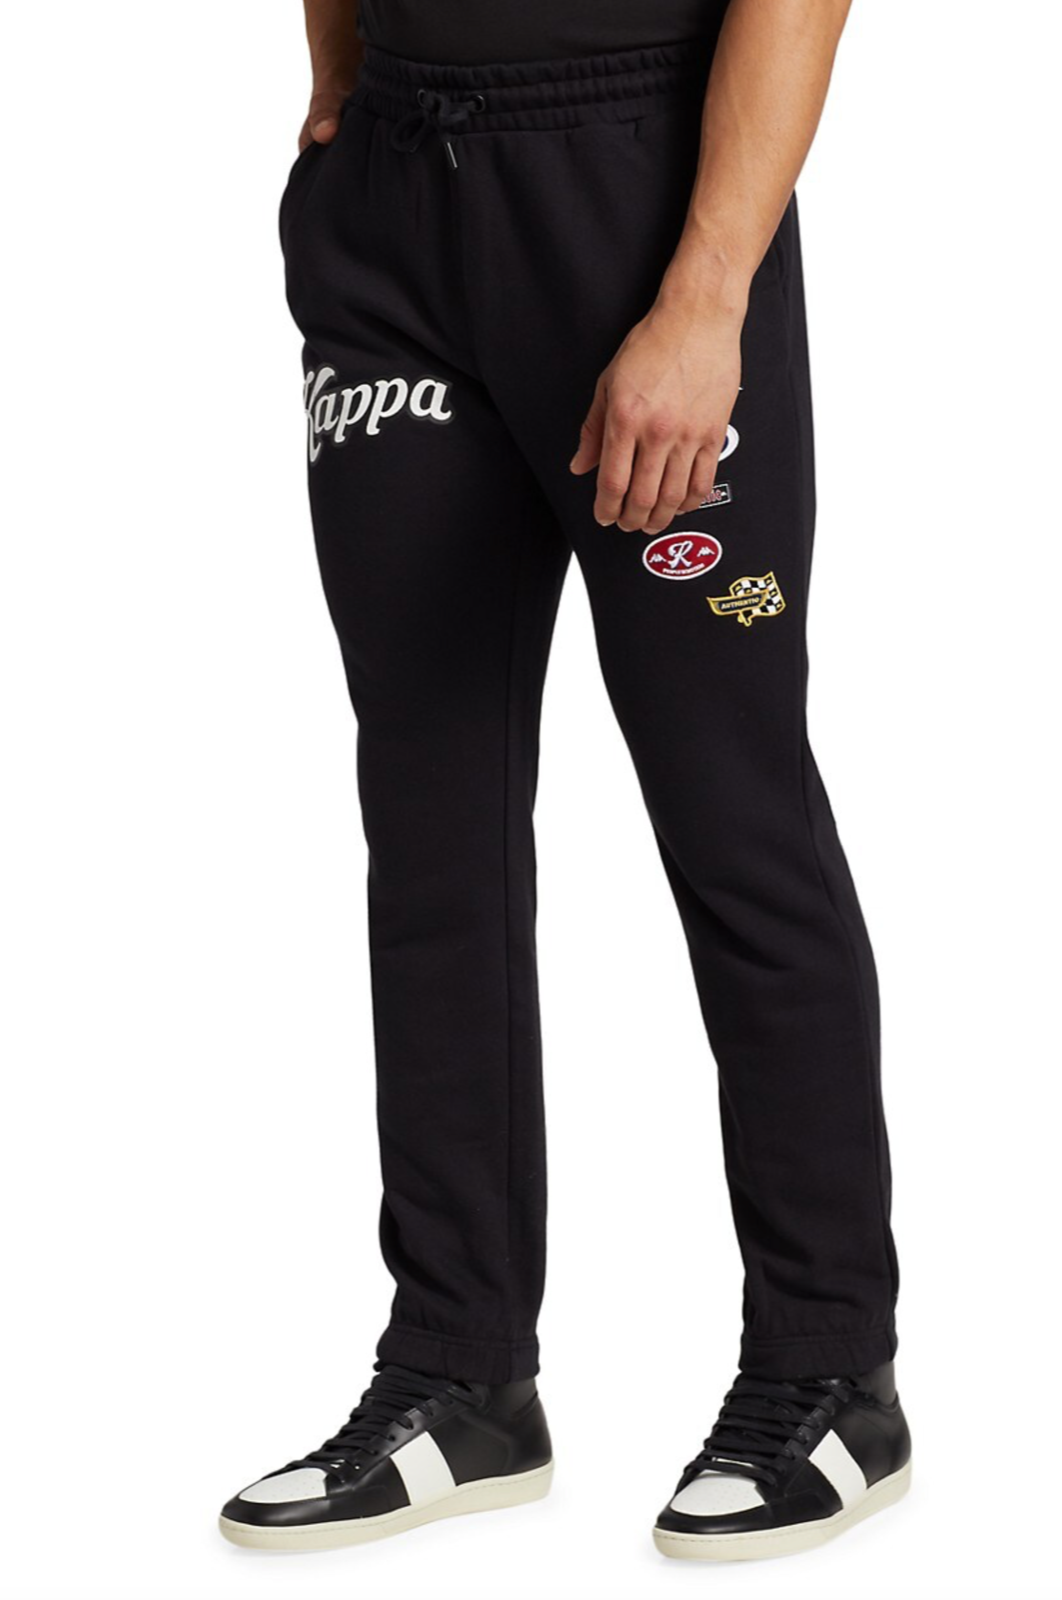 Primary image for Kappa Authentic Rager Logo Joggers MSRP: $110.00 "Medium"